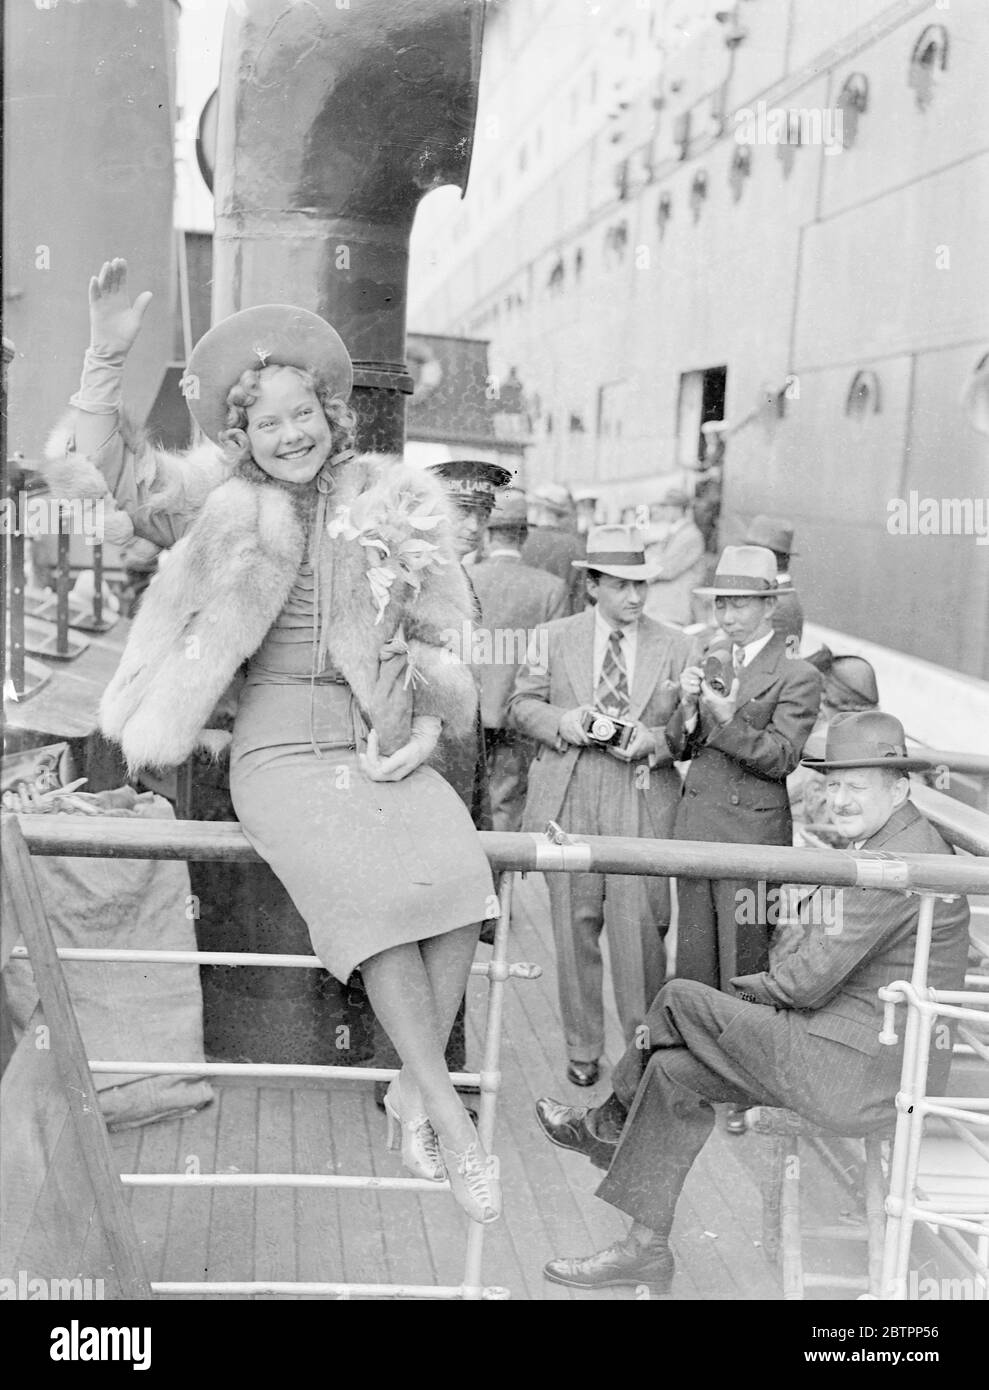 Sonja Henie arrives from America. Miss Sonja Henie, the skating film actress, arrived at Southampton on the liner 'Normandie' from America. Photo shows, Sonja Henie waving on arrival at Southampton. 4 July 1938 Stock Photo